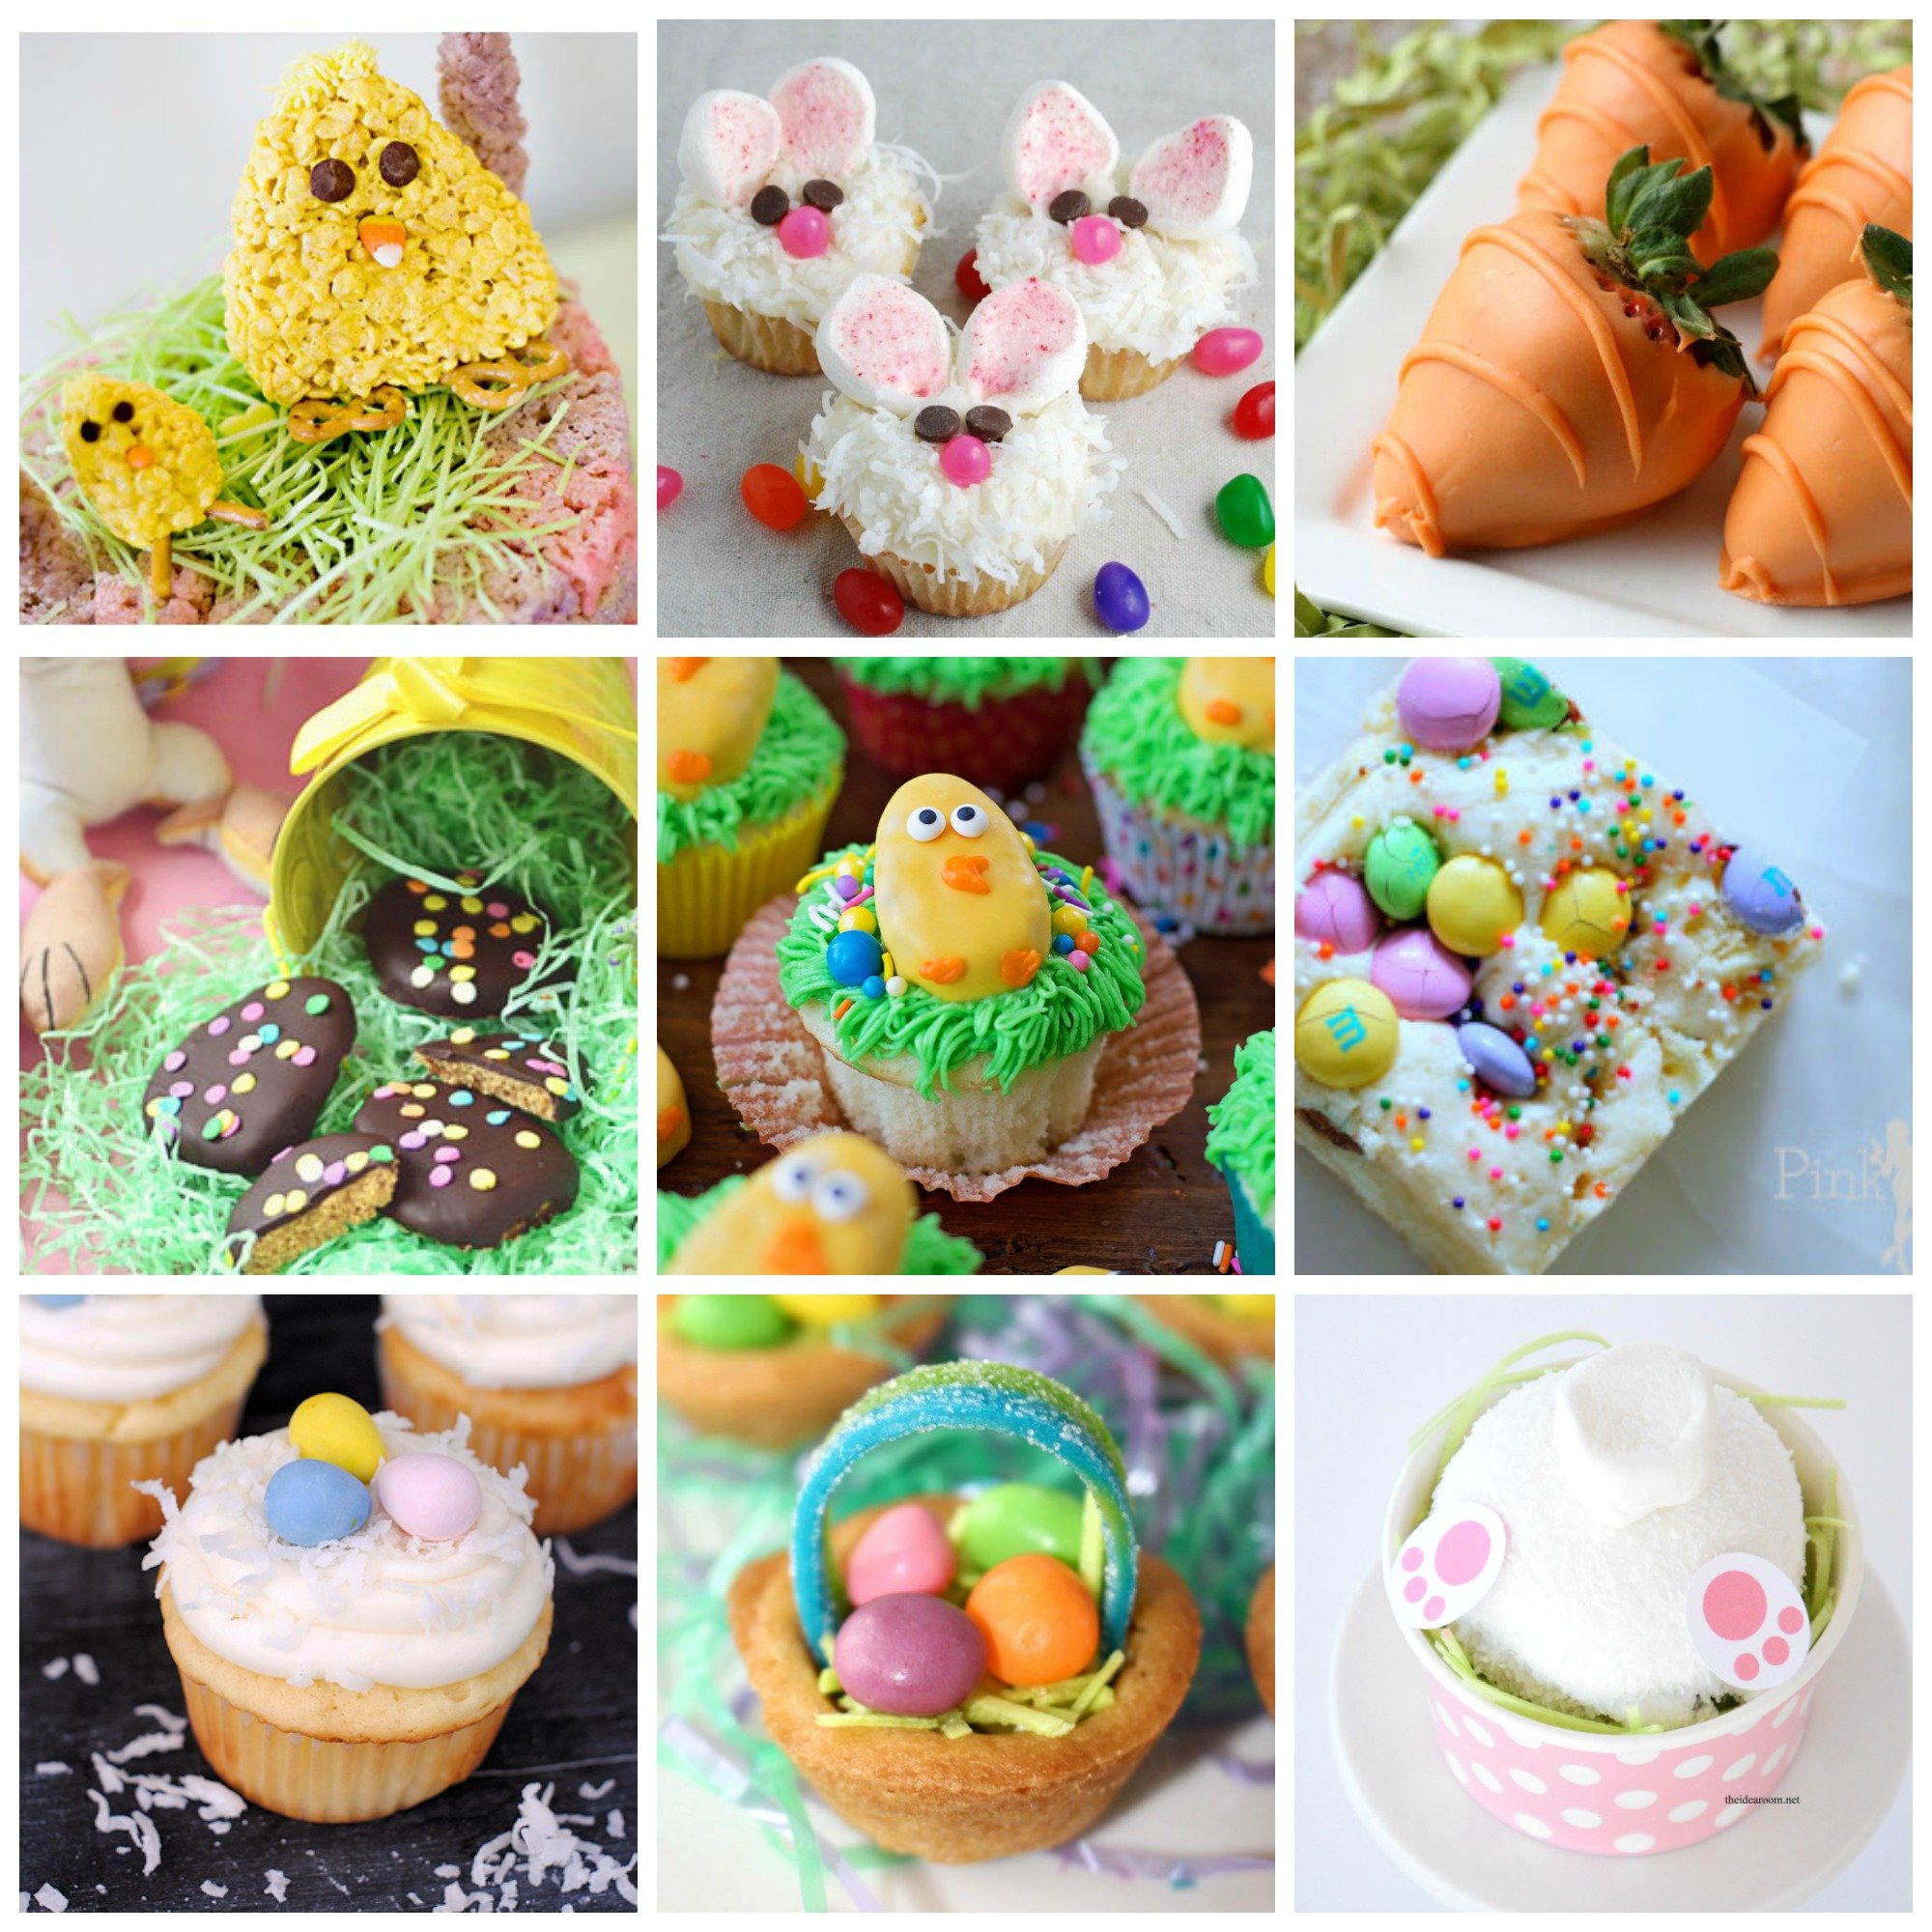 Easter Desserts - 20 ideas for you! - The Country Chic Cottage